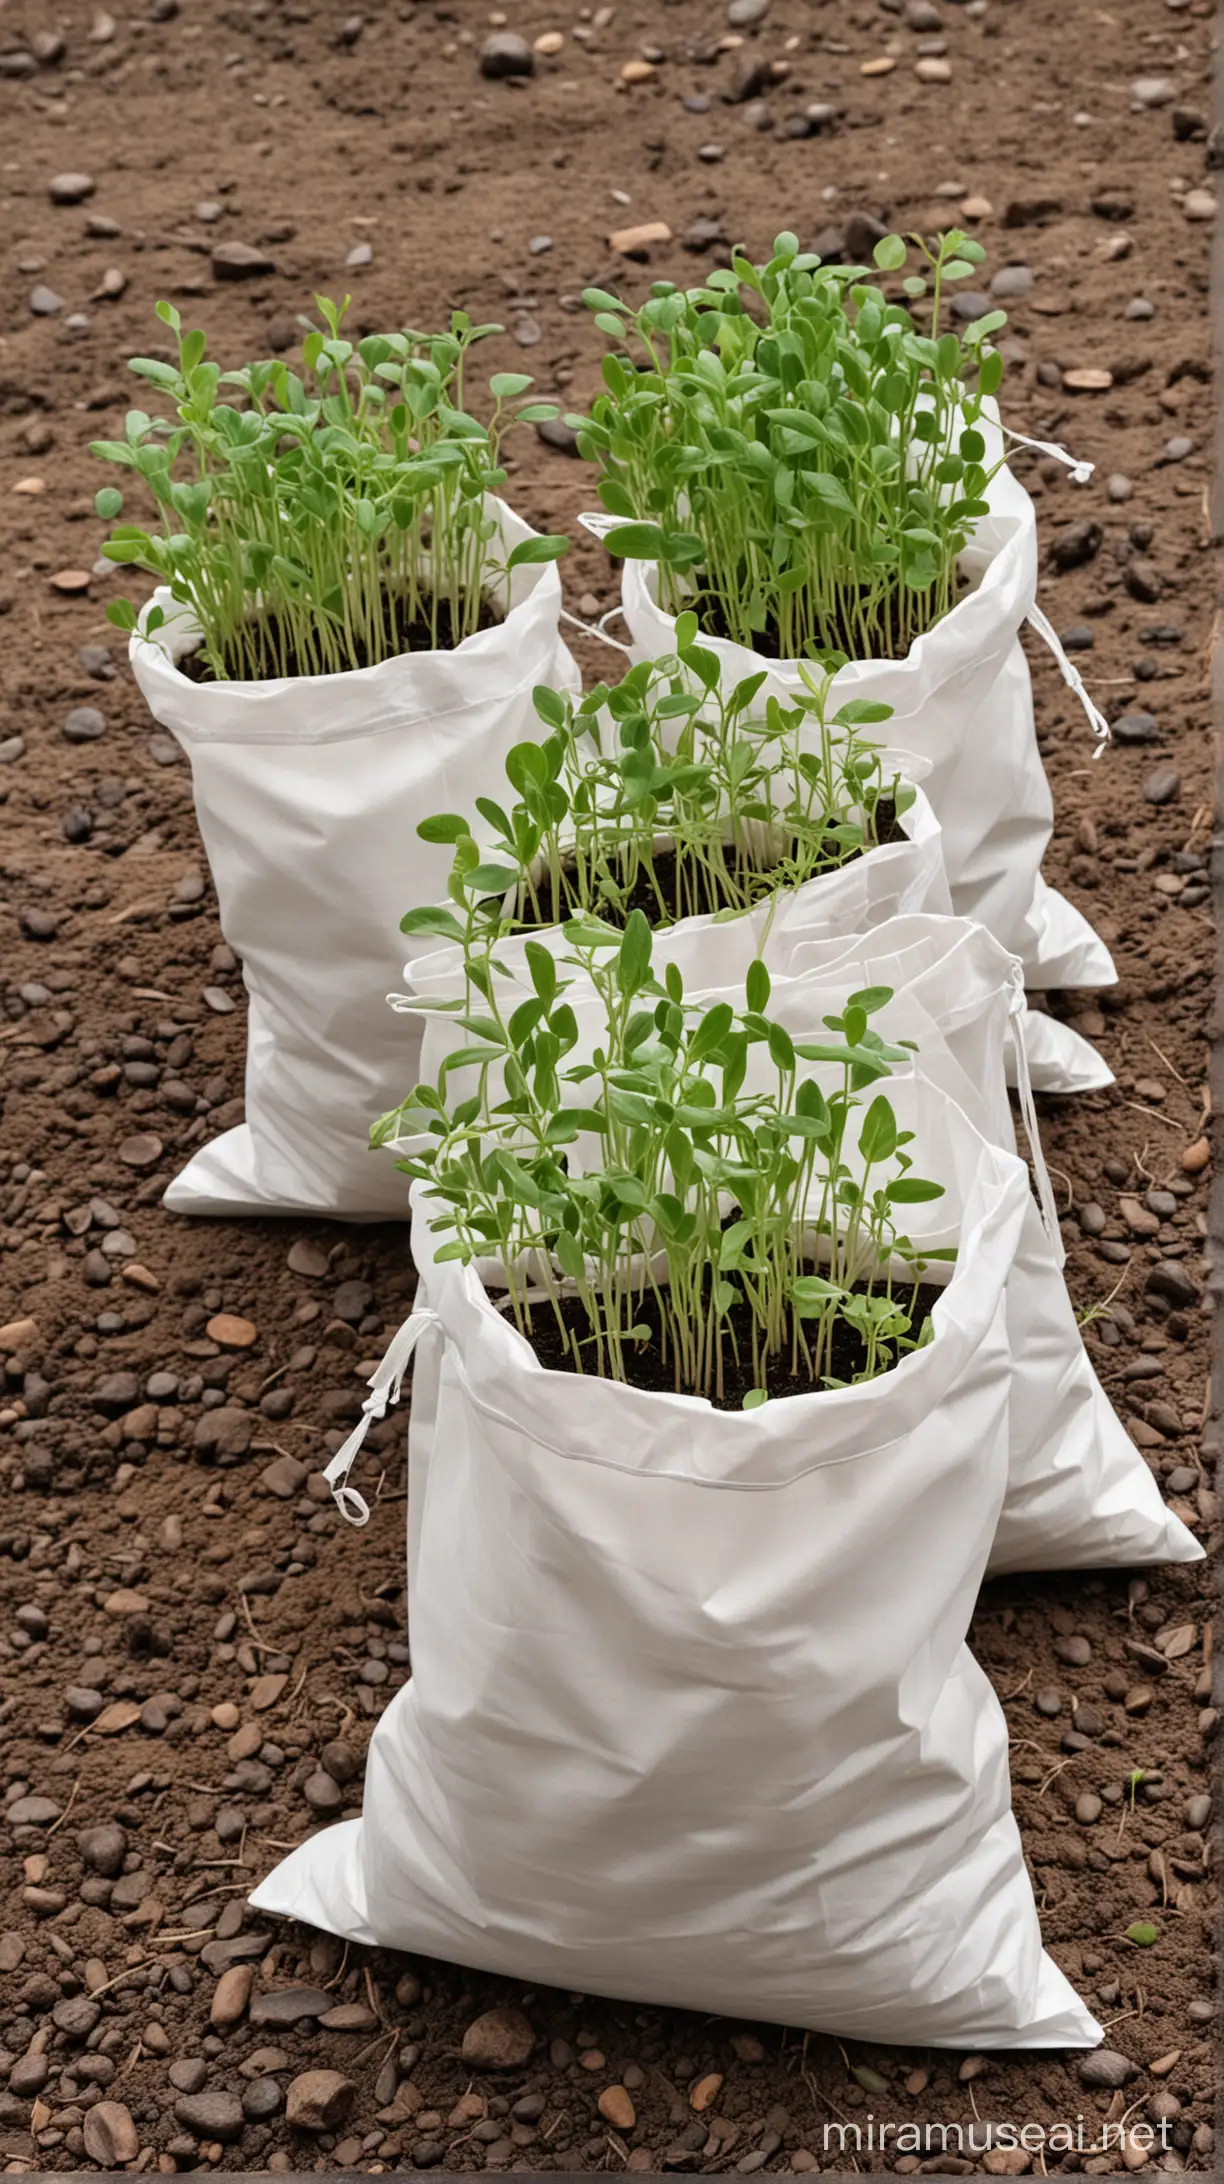 Hyper Realistic Observation of Sprouting Seedlings in Bags